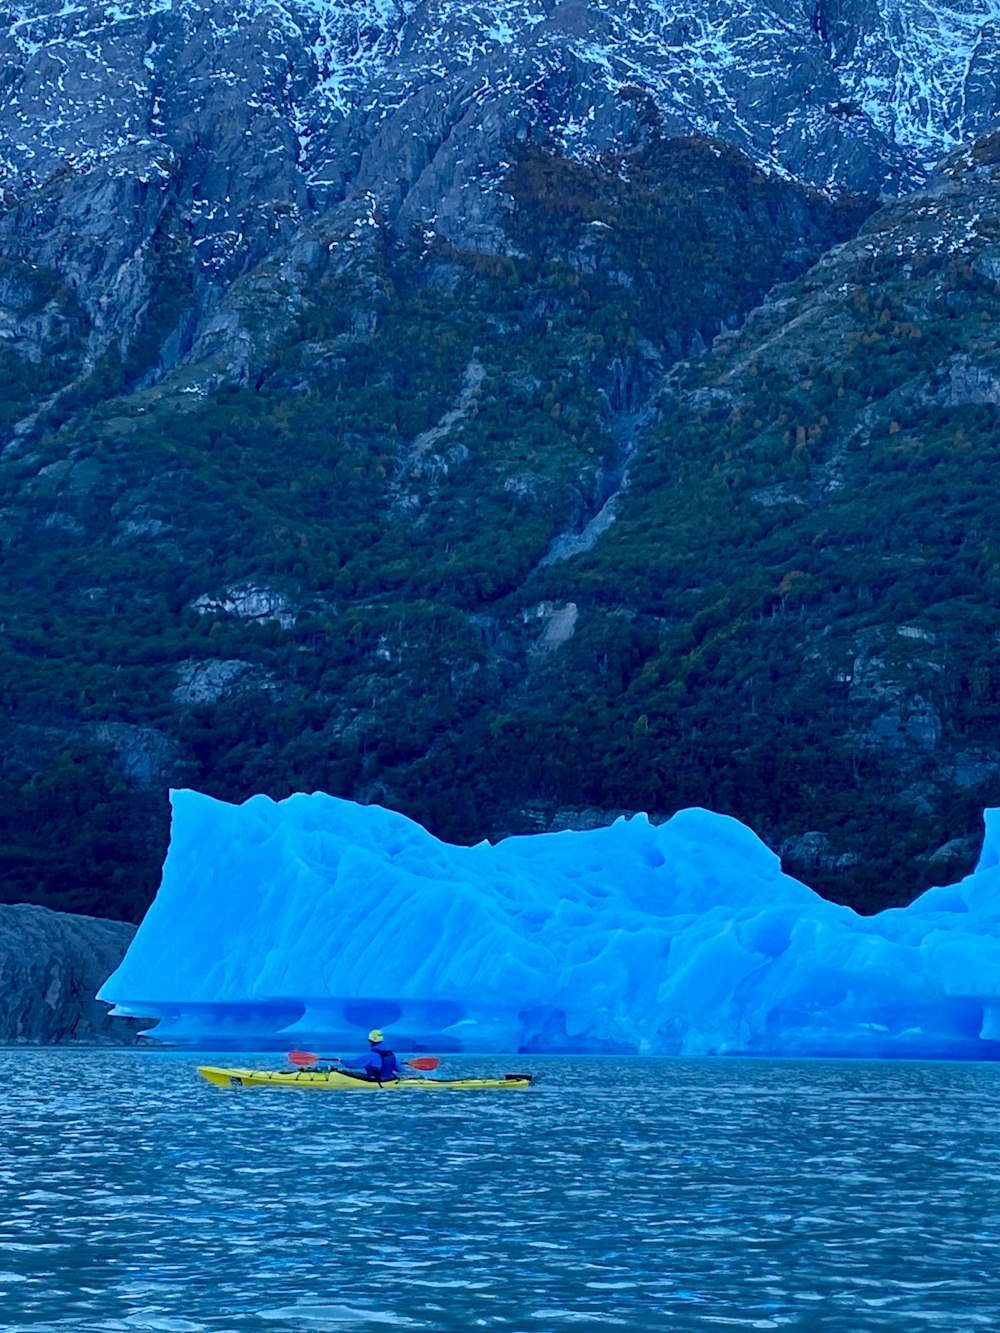 a person in a kayak in front of a large iceberg